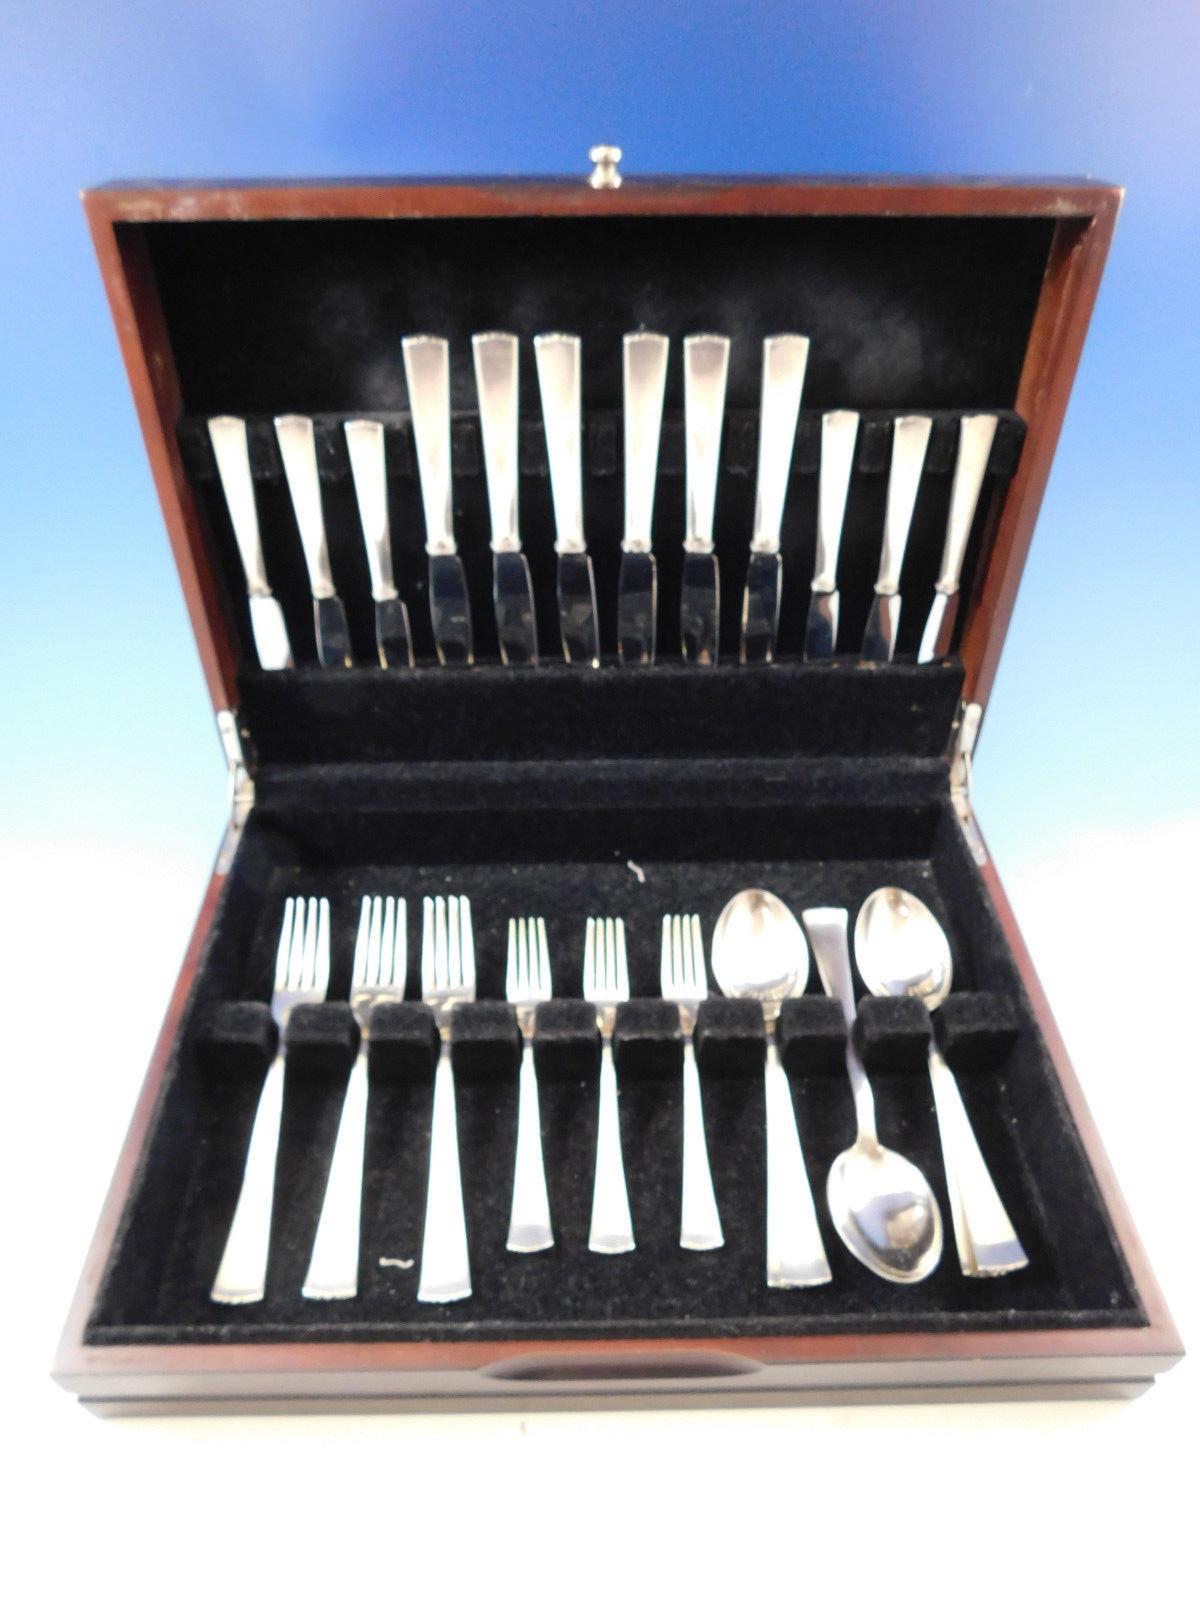 Exquisite Diplomat by C.G Hallberg (Swedish-Stockholm) Mid-Century Modern, circa 1956, 830 Silver Flatware set - 30 pieces. This set includes:

6 Knives, 8 1/2